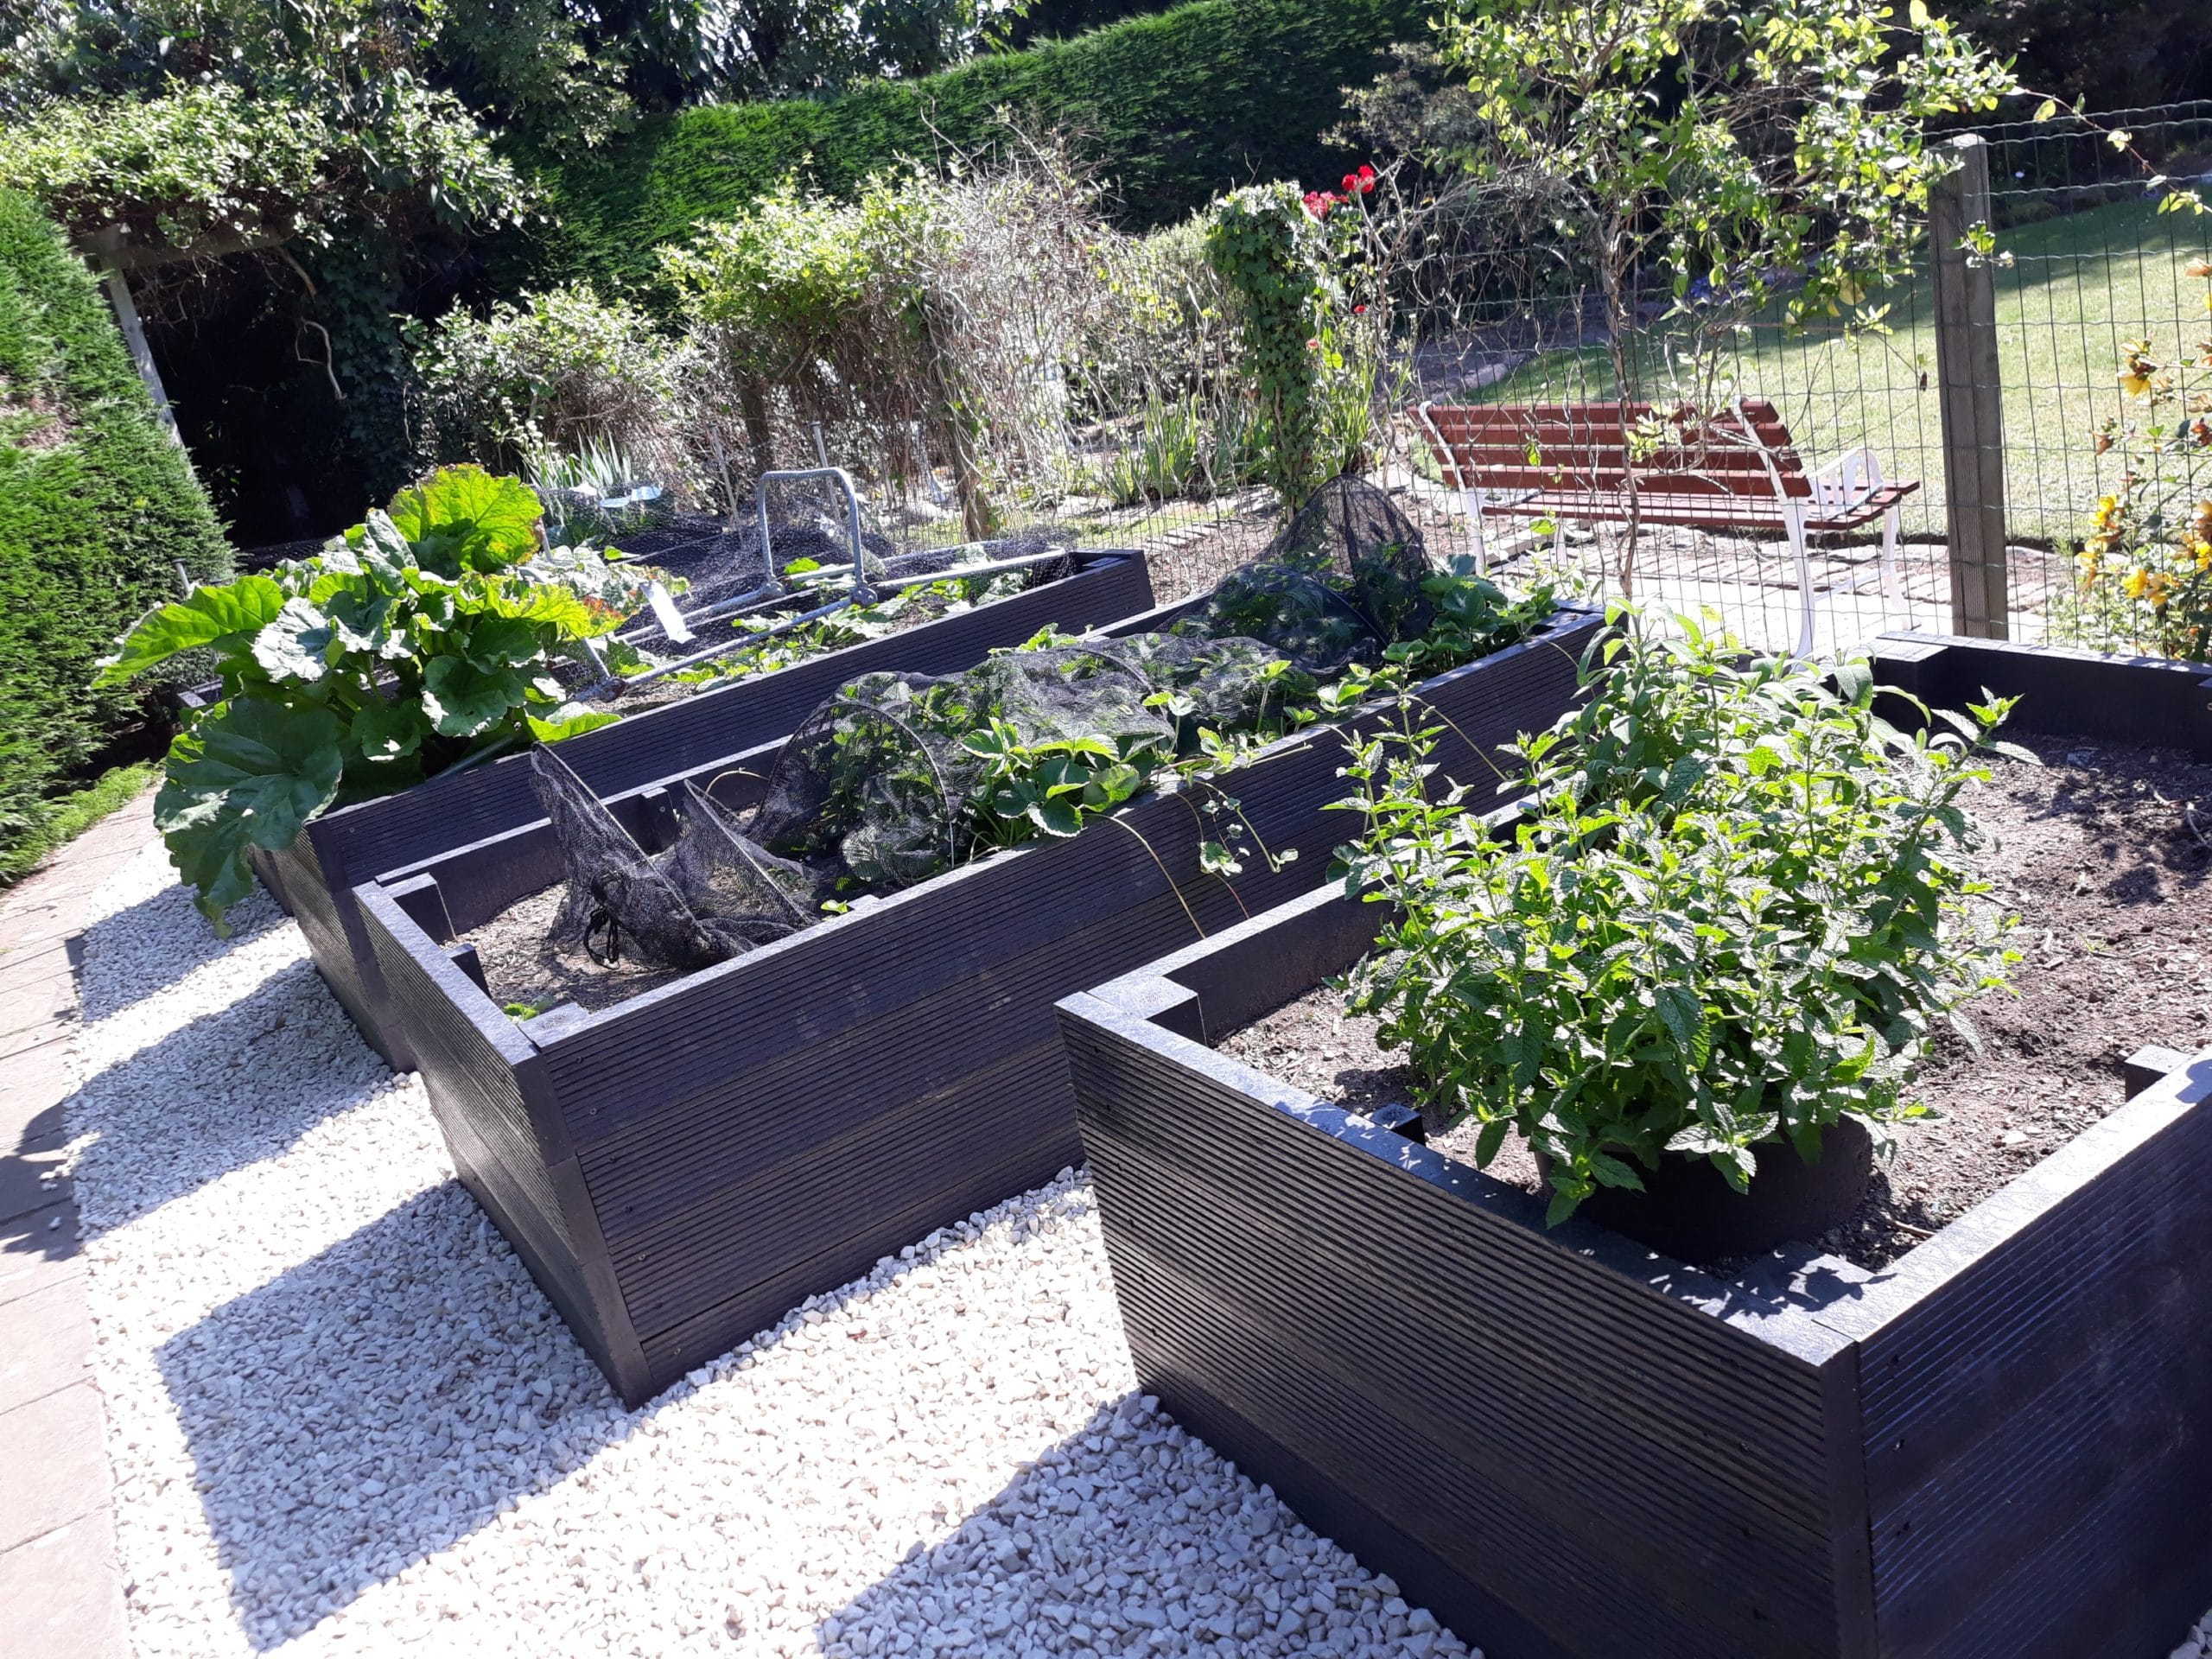 Raised beds lined up in garden